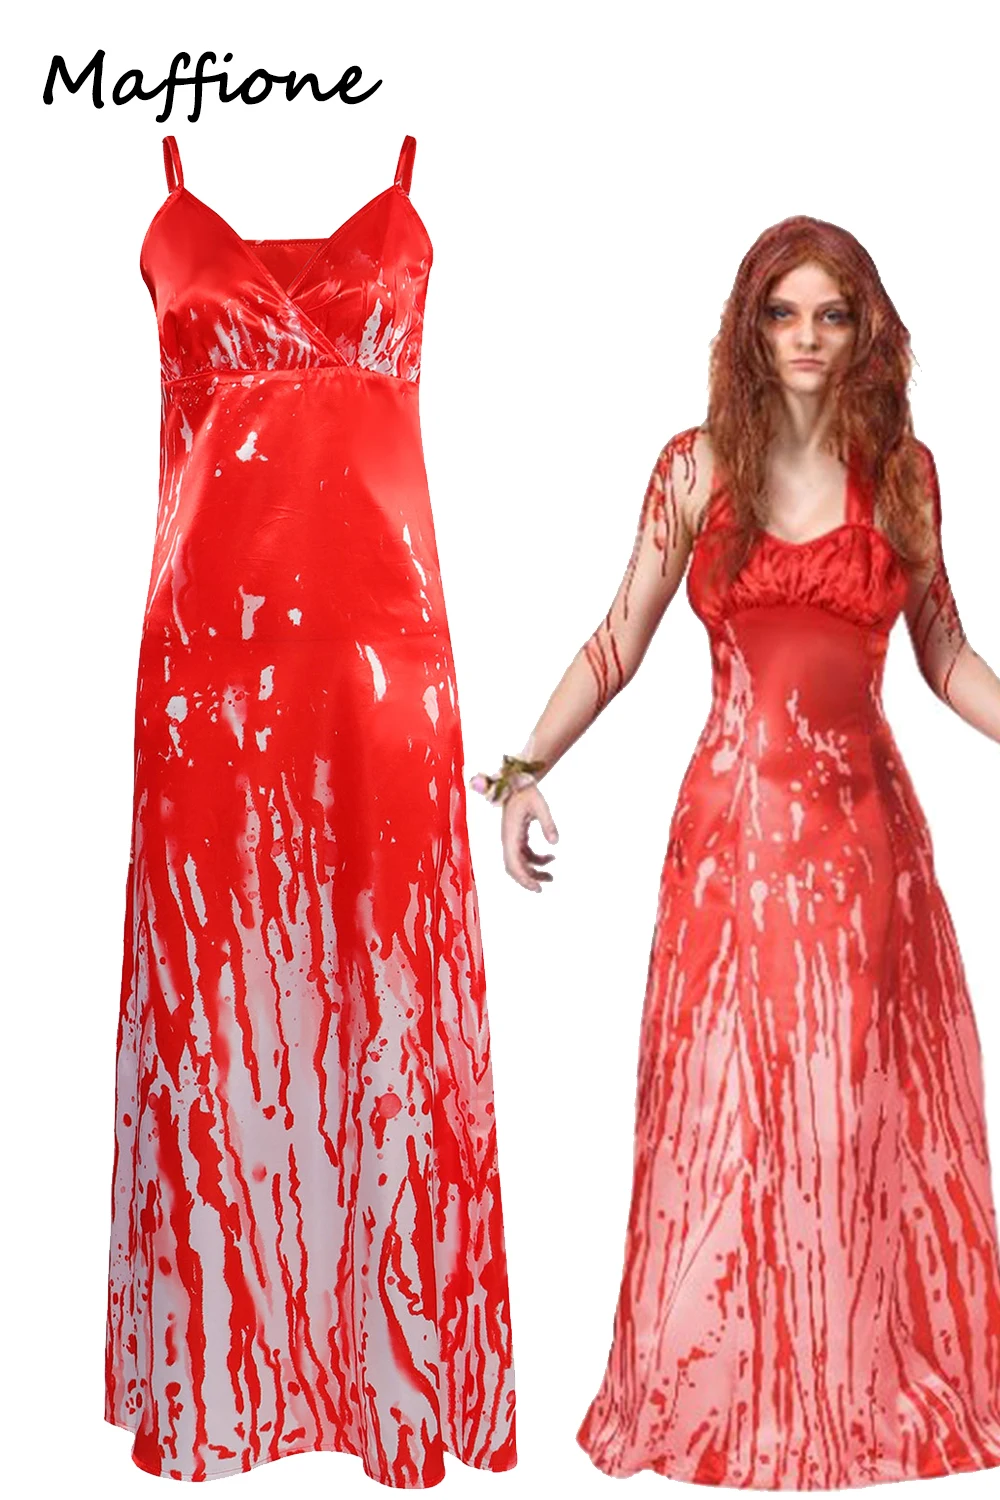 

Women Horror Movie Carrie White Cosplay Sexy Blood Red Slip Printed Dress Costume Adult Girls Halloween Party Roleplay Suit